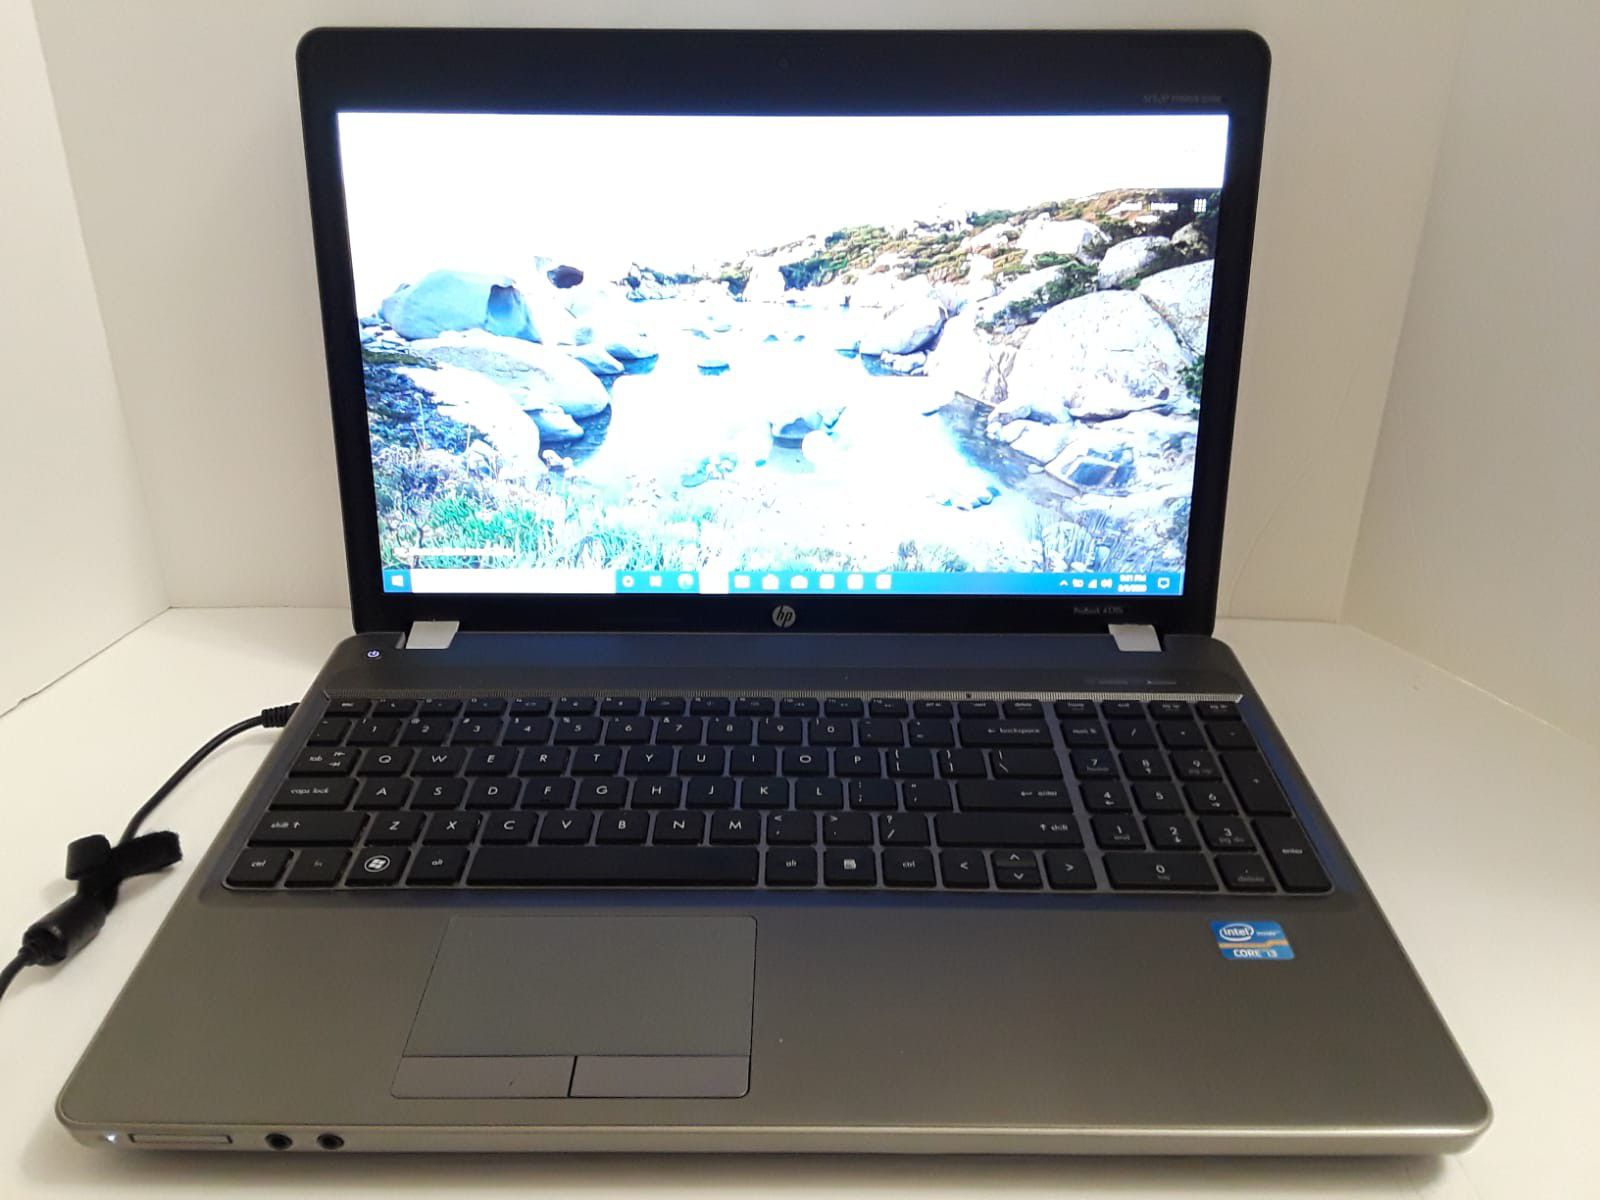 HP PROBOOK Laptop, 16" inches, Core i3, HDD 500GB, Office installed